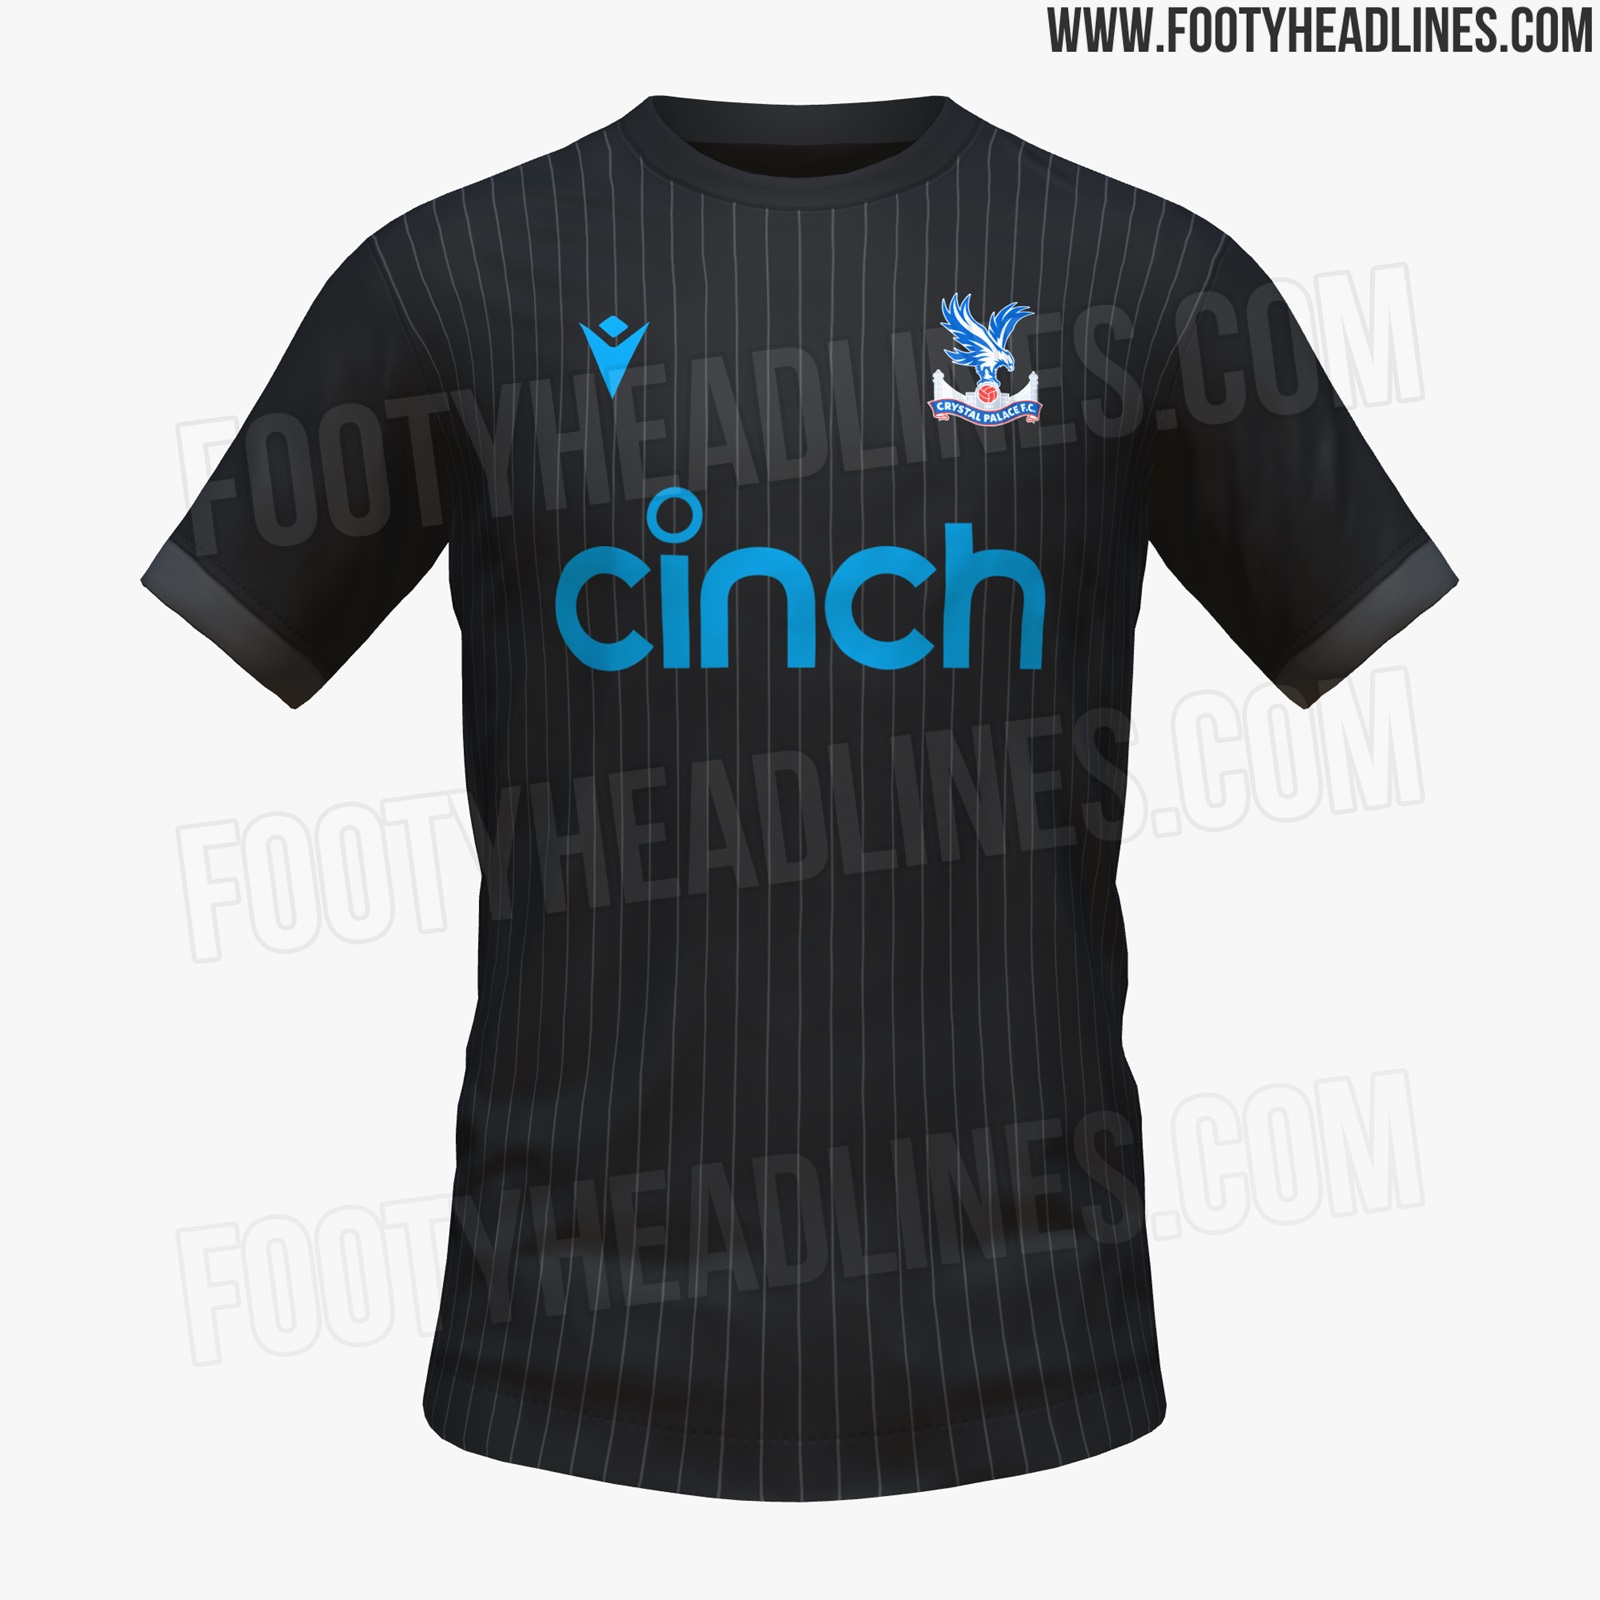 FAKE: This Is Not The Crystal Palace 22-23 Third Kit - Footy Headlines